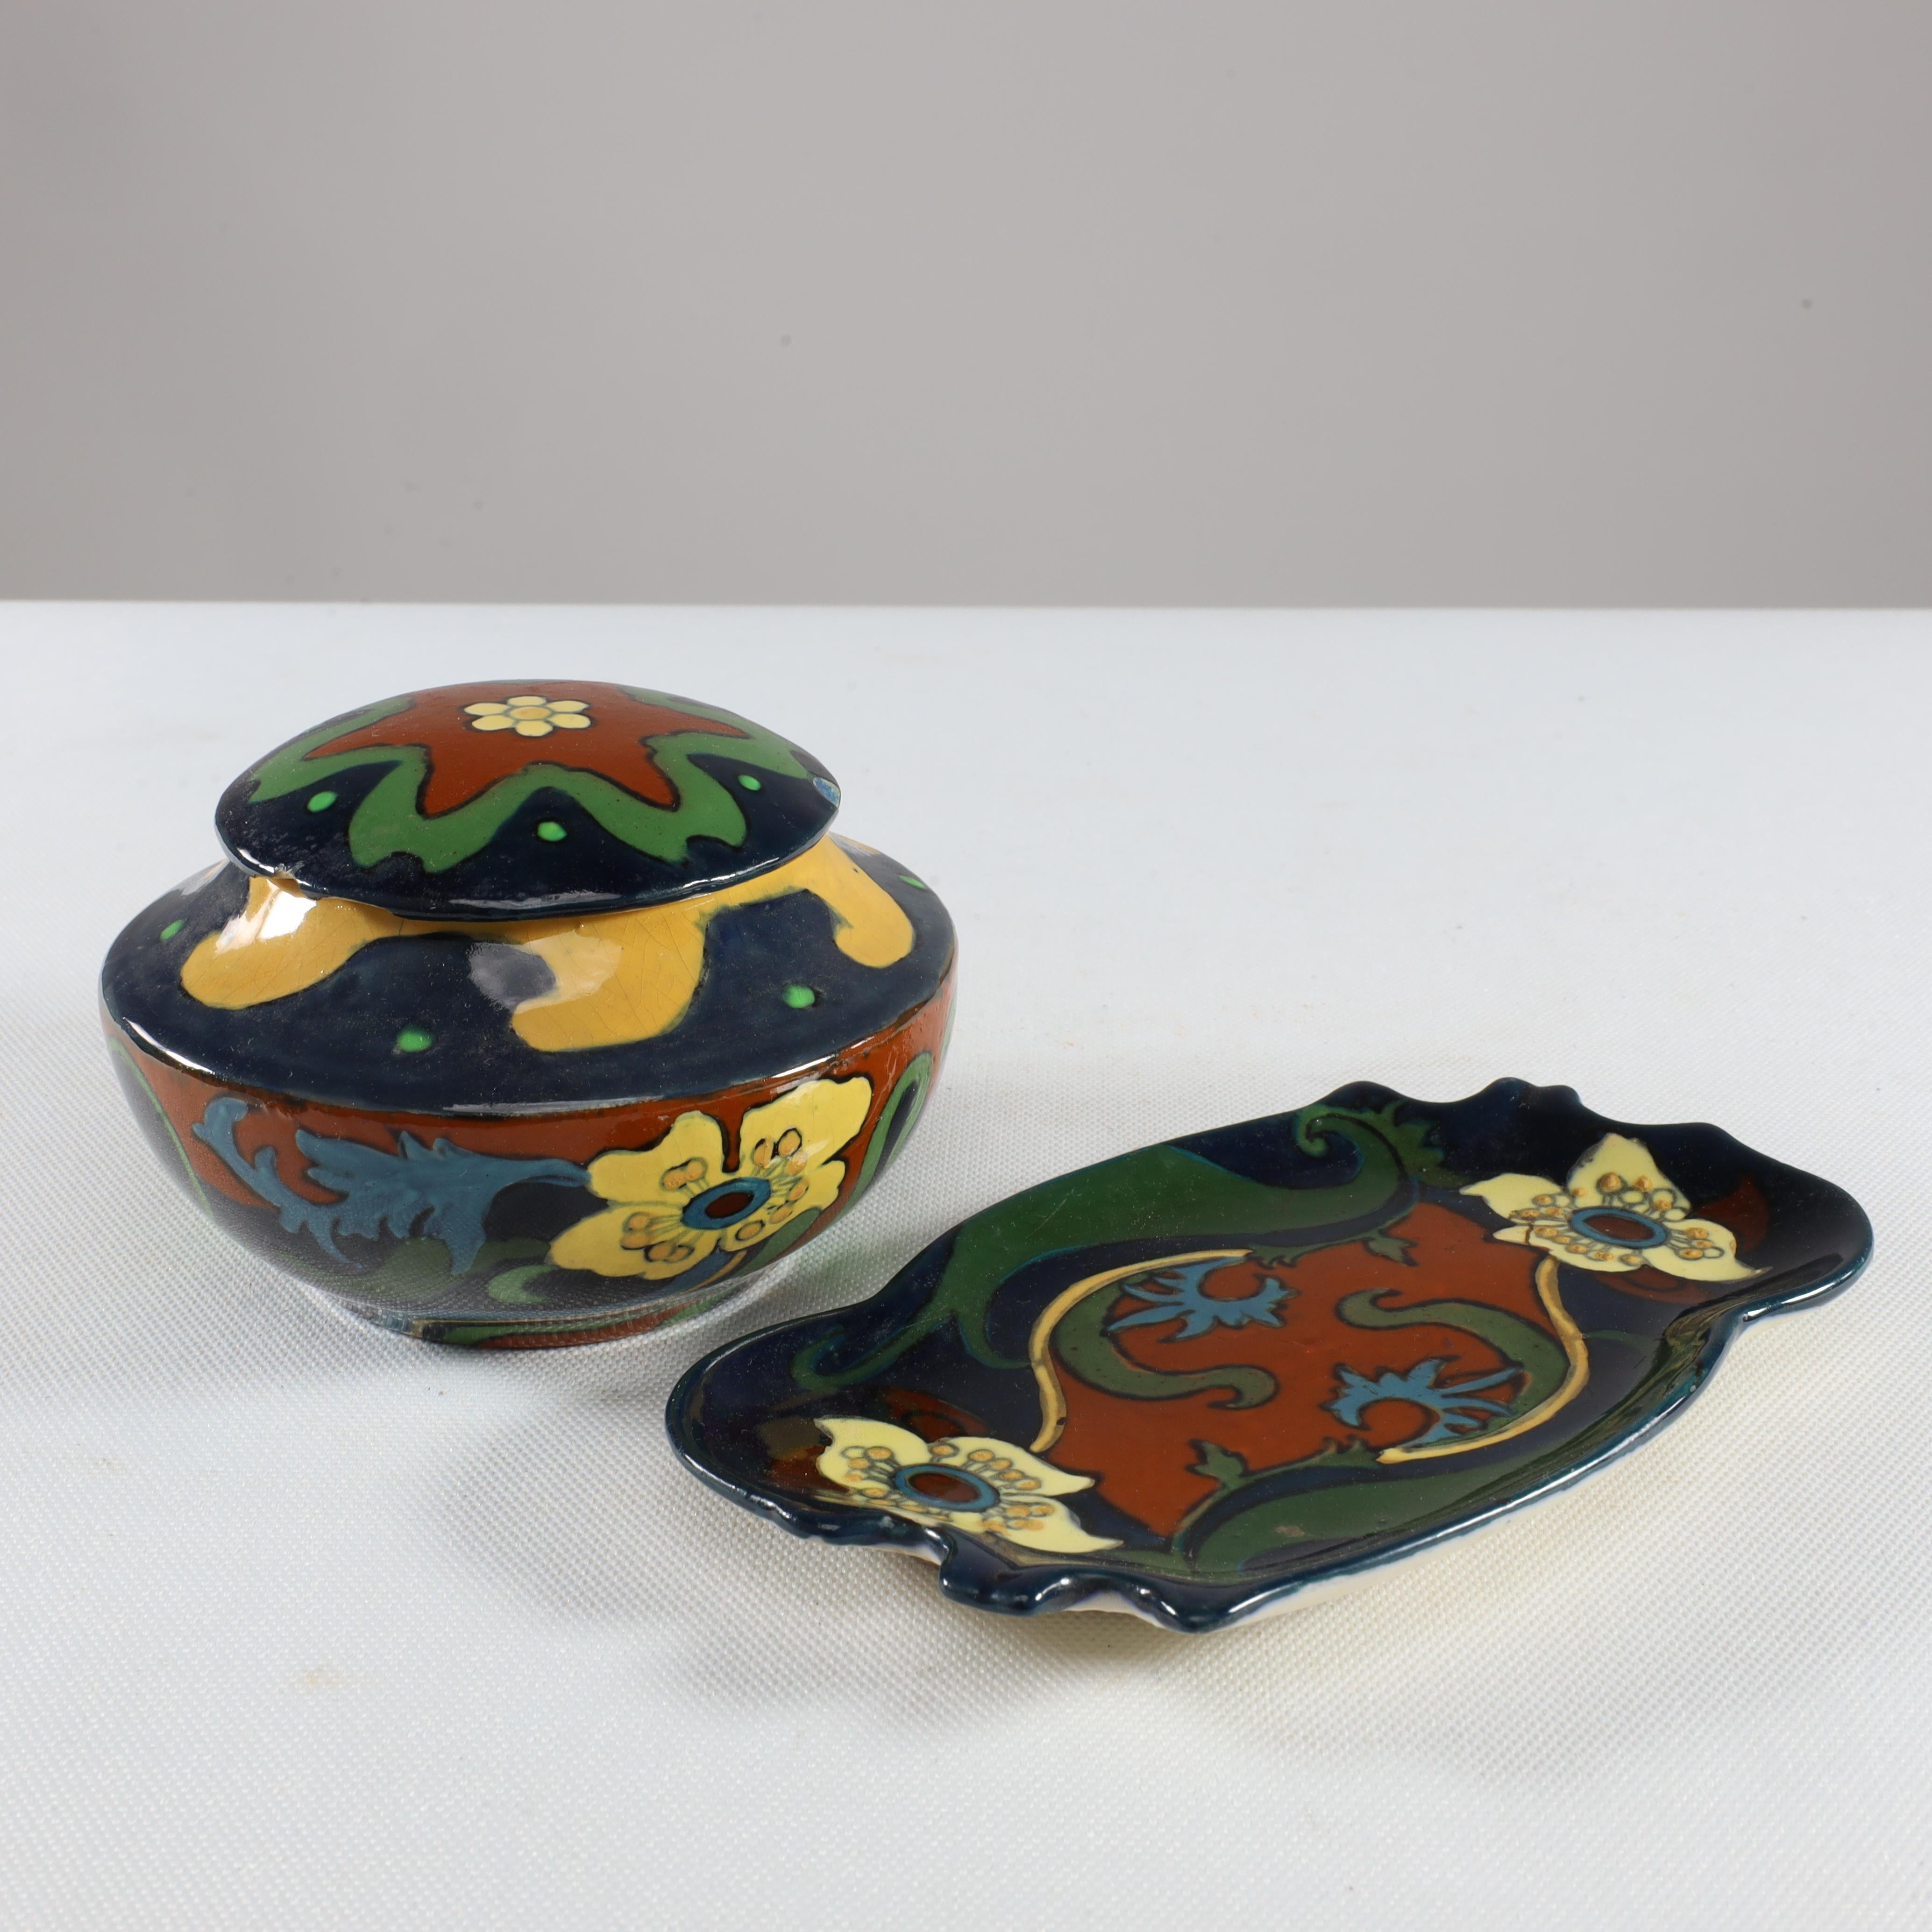 Frederick Alfred Rhead for Foley Art Pottery. Small pin tray and pot. Rhead was employed in 1896, as the Arts Director. Rhead was already an important designer and introduced the Intarsio range to the company. In 1899 the journal 'Artist' wrote an